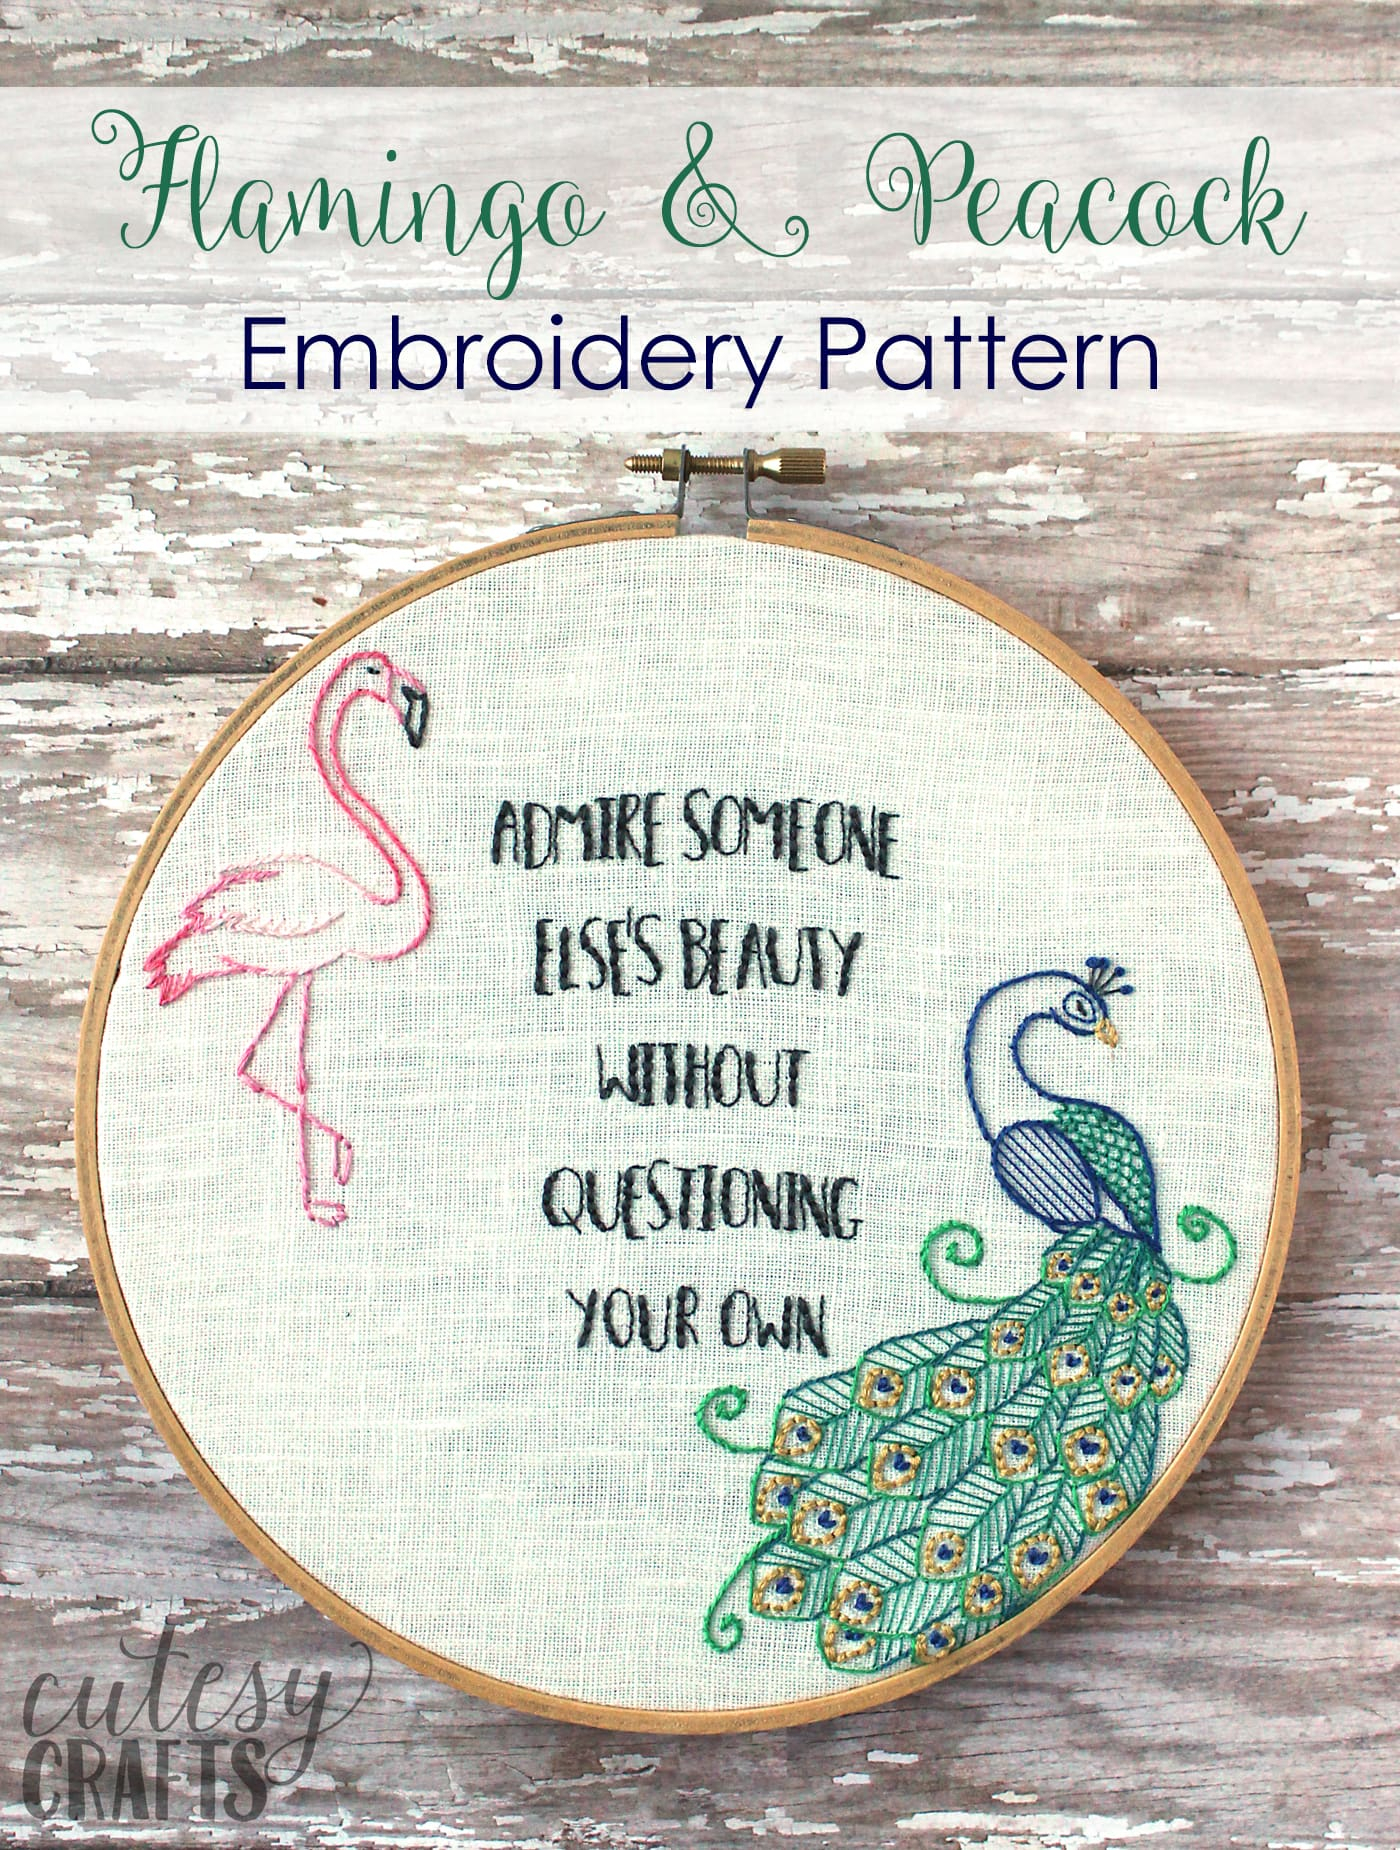 Peacock Embroidery Patterns Flamingo And Peacock Free Embroidery Pattern The Polka Dot Chair